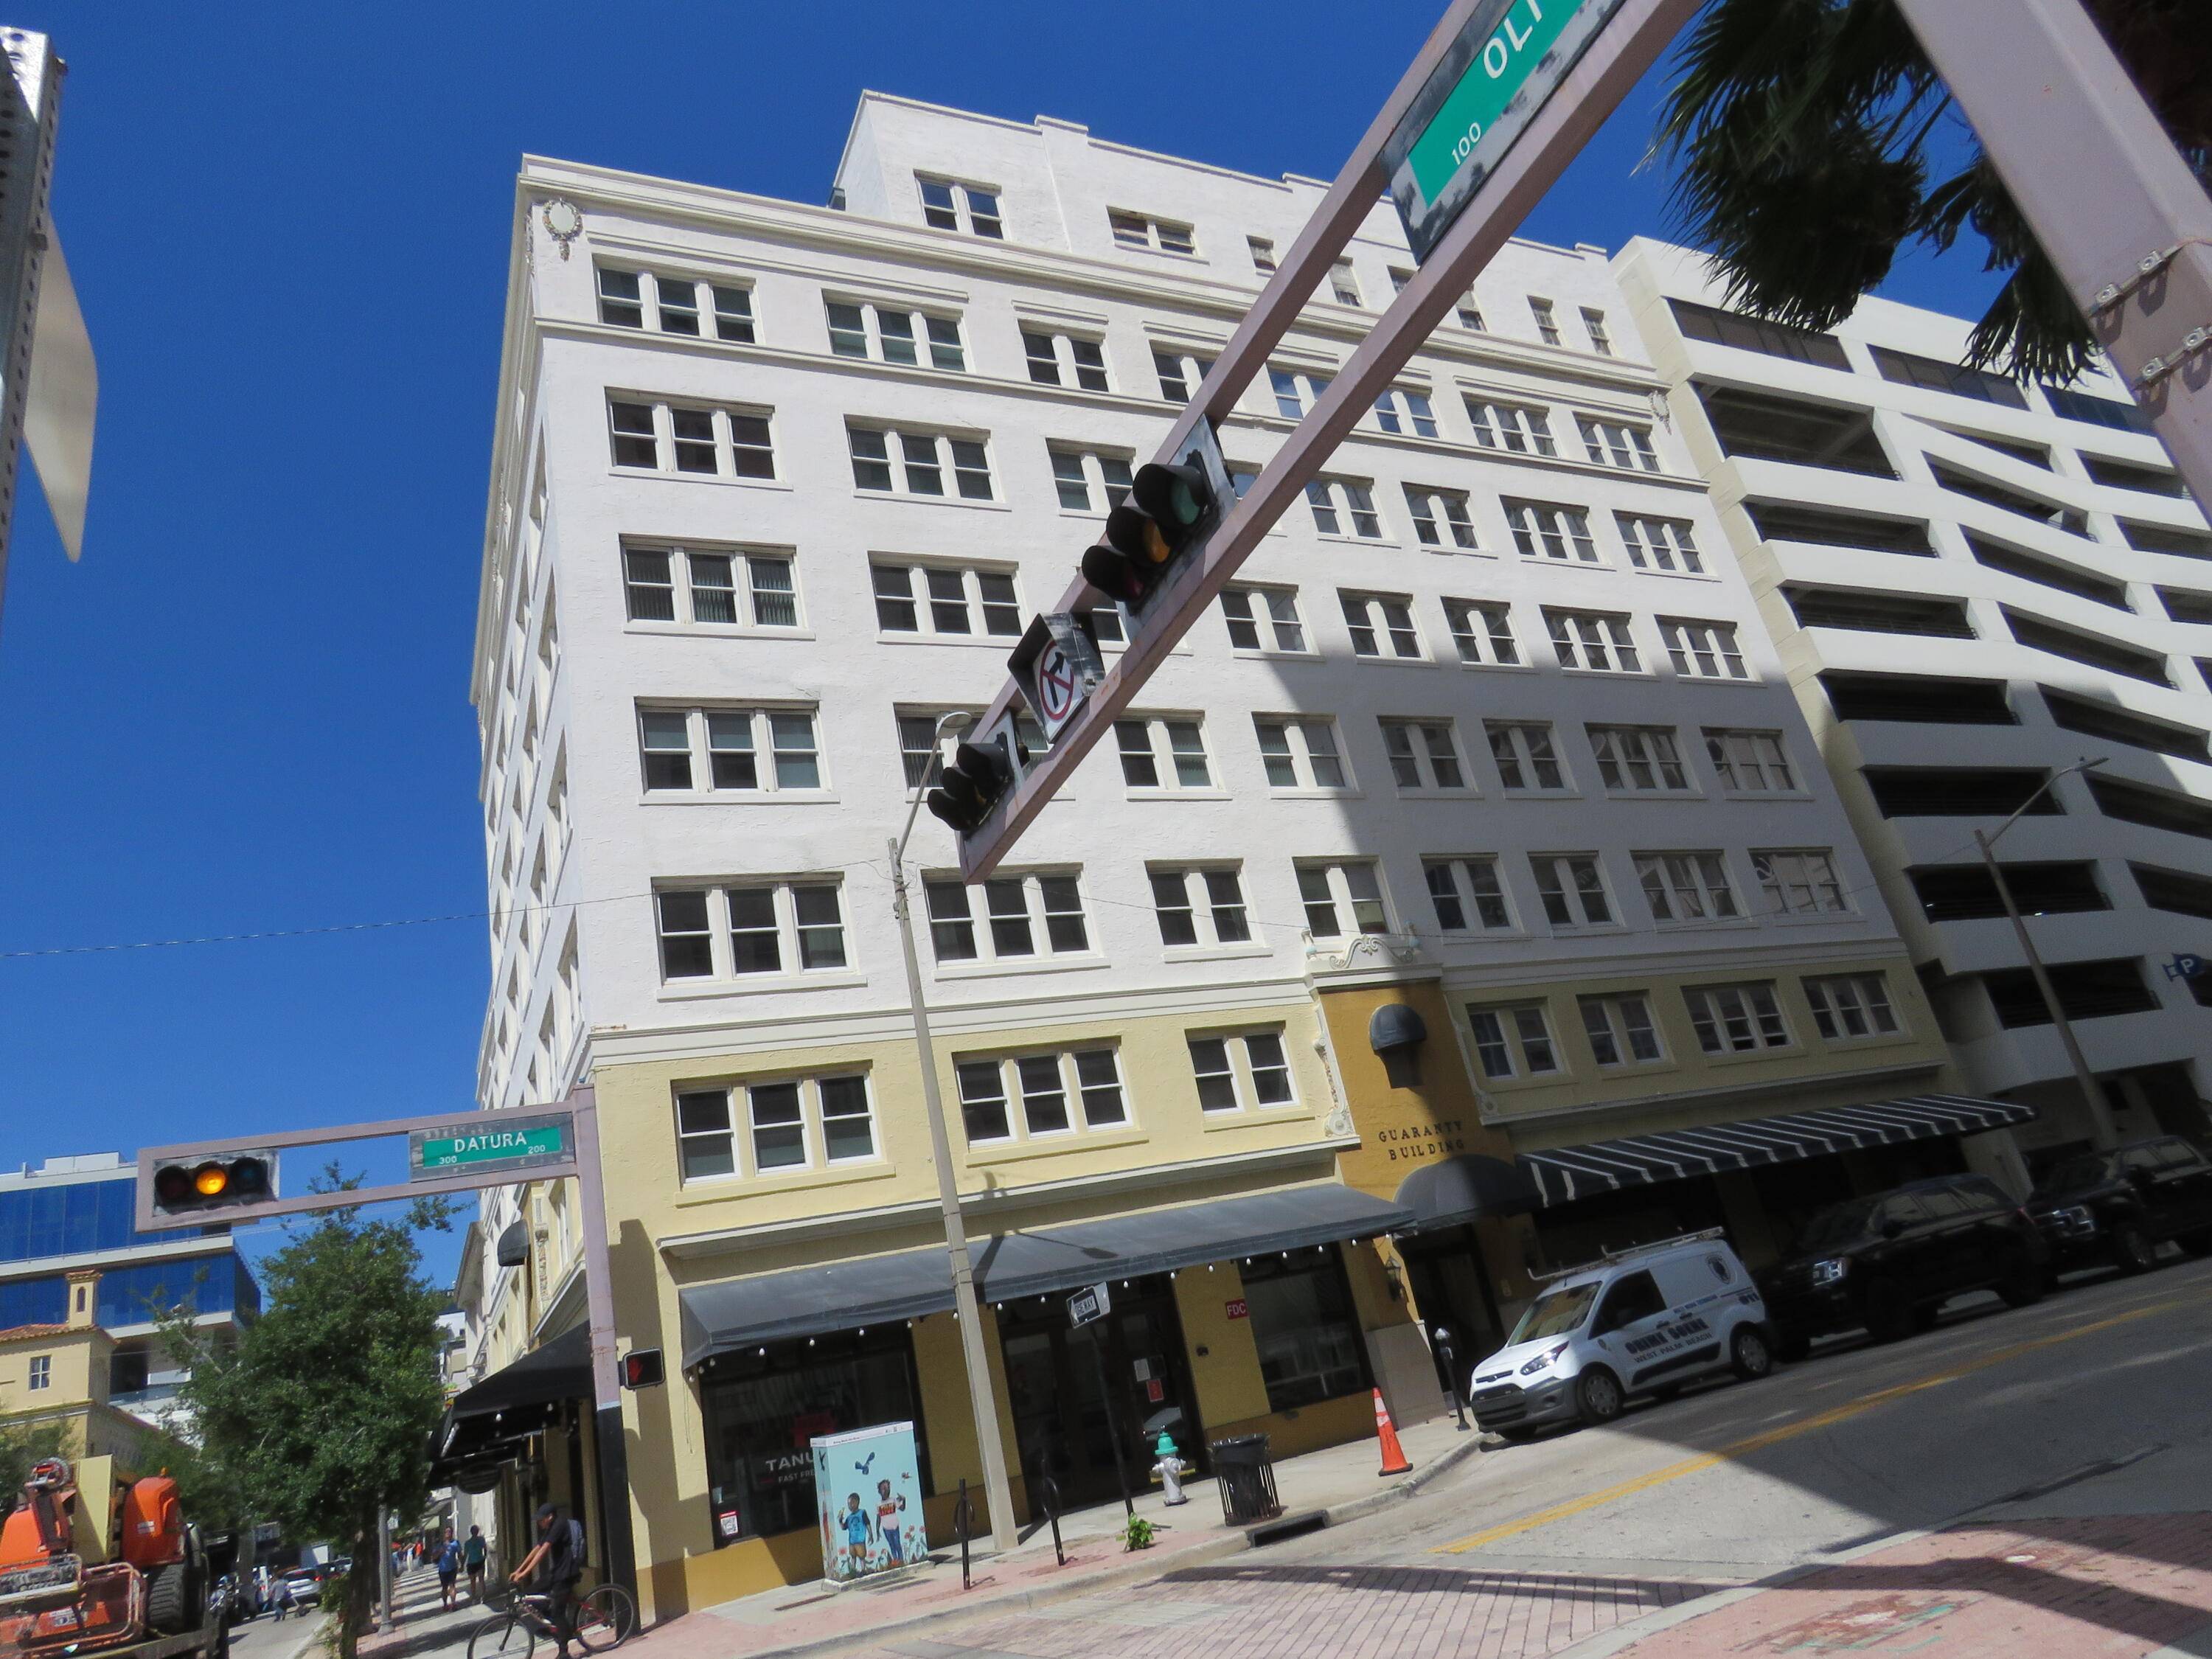 This bright and airy office with windows overlooking downtown West Palm Beach just blocks from the courthouse, office buildings, etc.